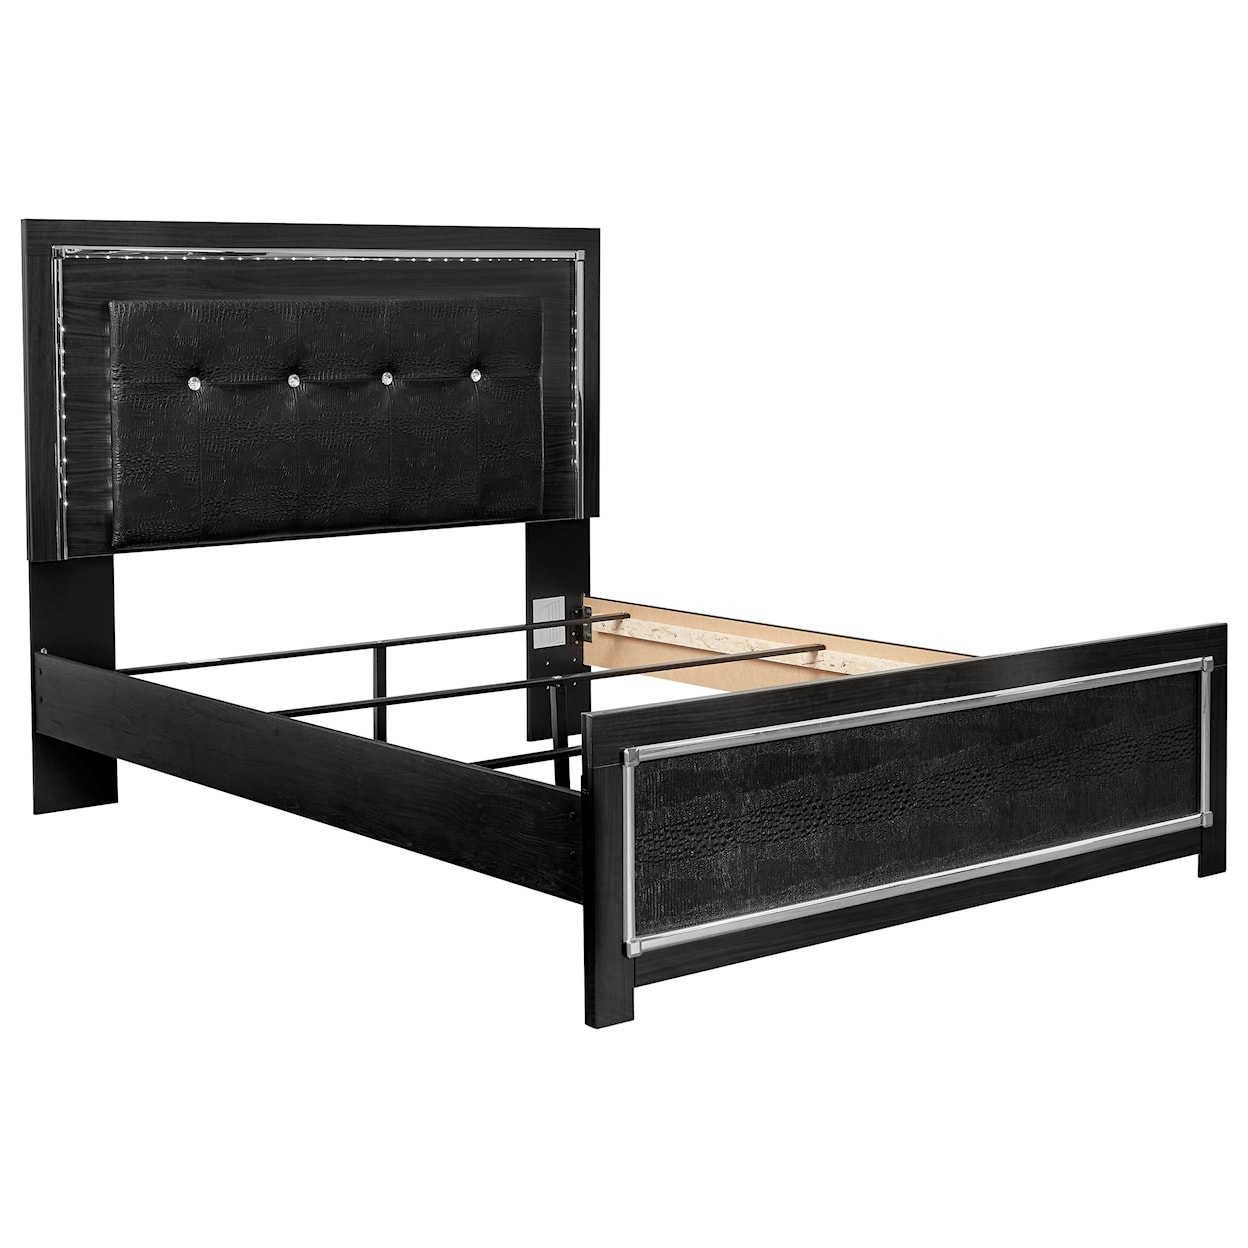 Ashley Furniture Signature Design Kaydell Queen Upholstered Bed with LED Lighting